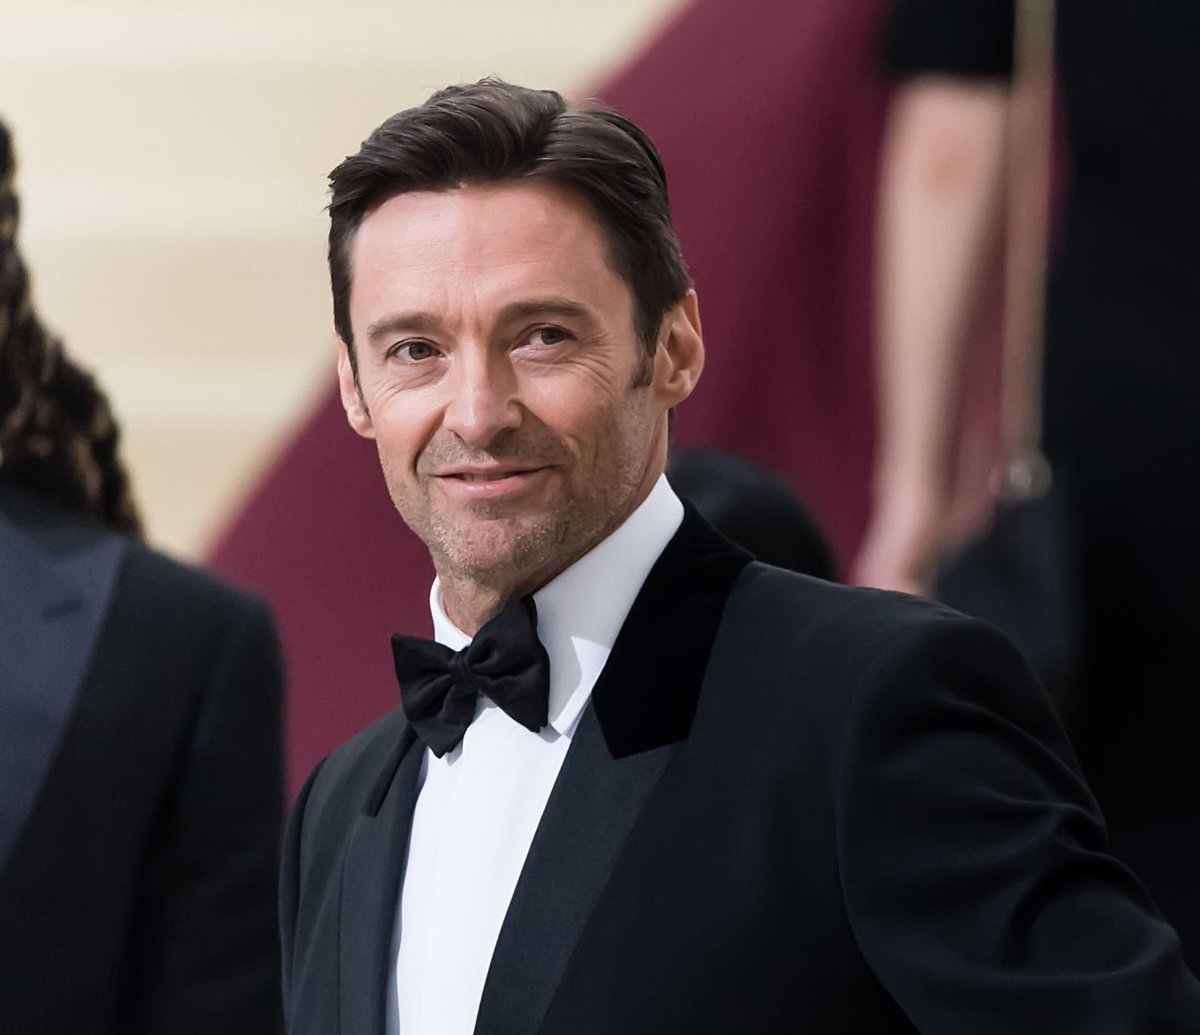 How about this look?! 🤩🥰 Hugh attended 'Rei Kawakubo/Comme des Garcons: Art Of The In-Between' at the Metropolitan Museum of Art on this day in 2017 in New York City. 📸: Gilbert Carrasquillo #HughJackman #themet